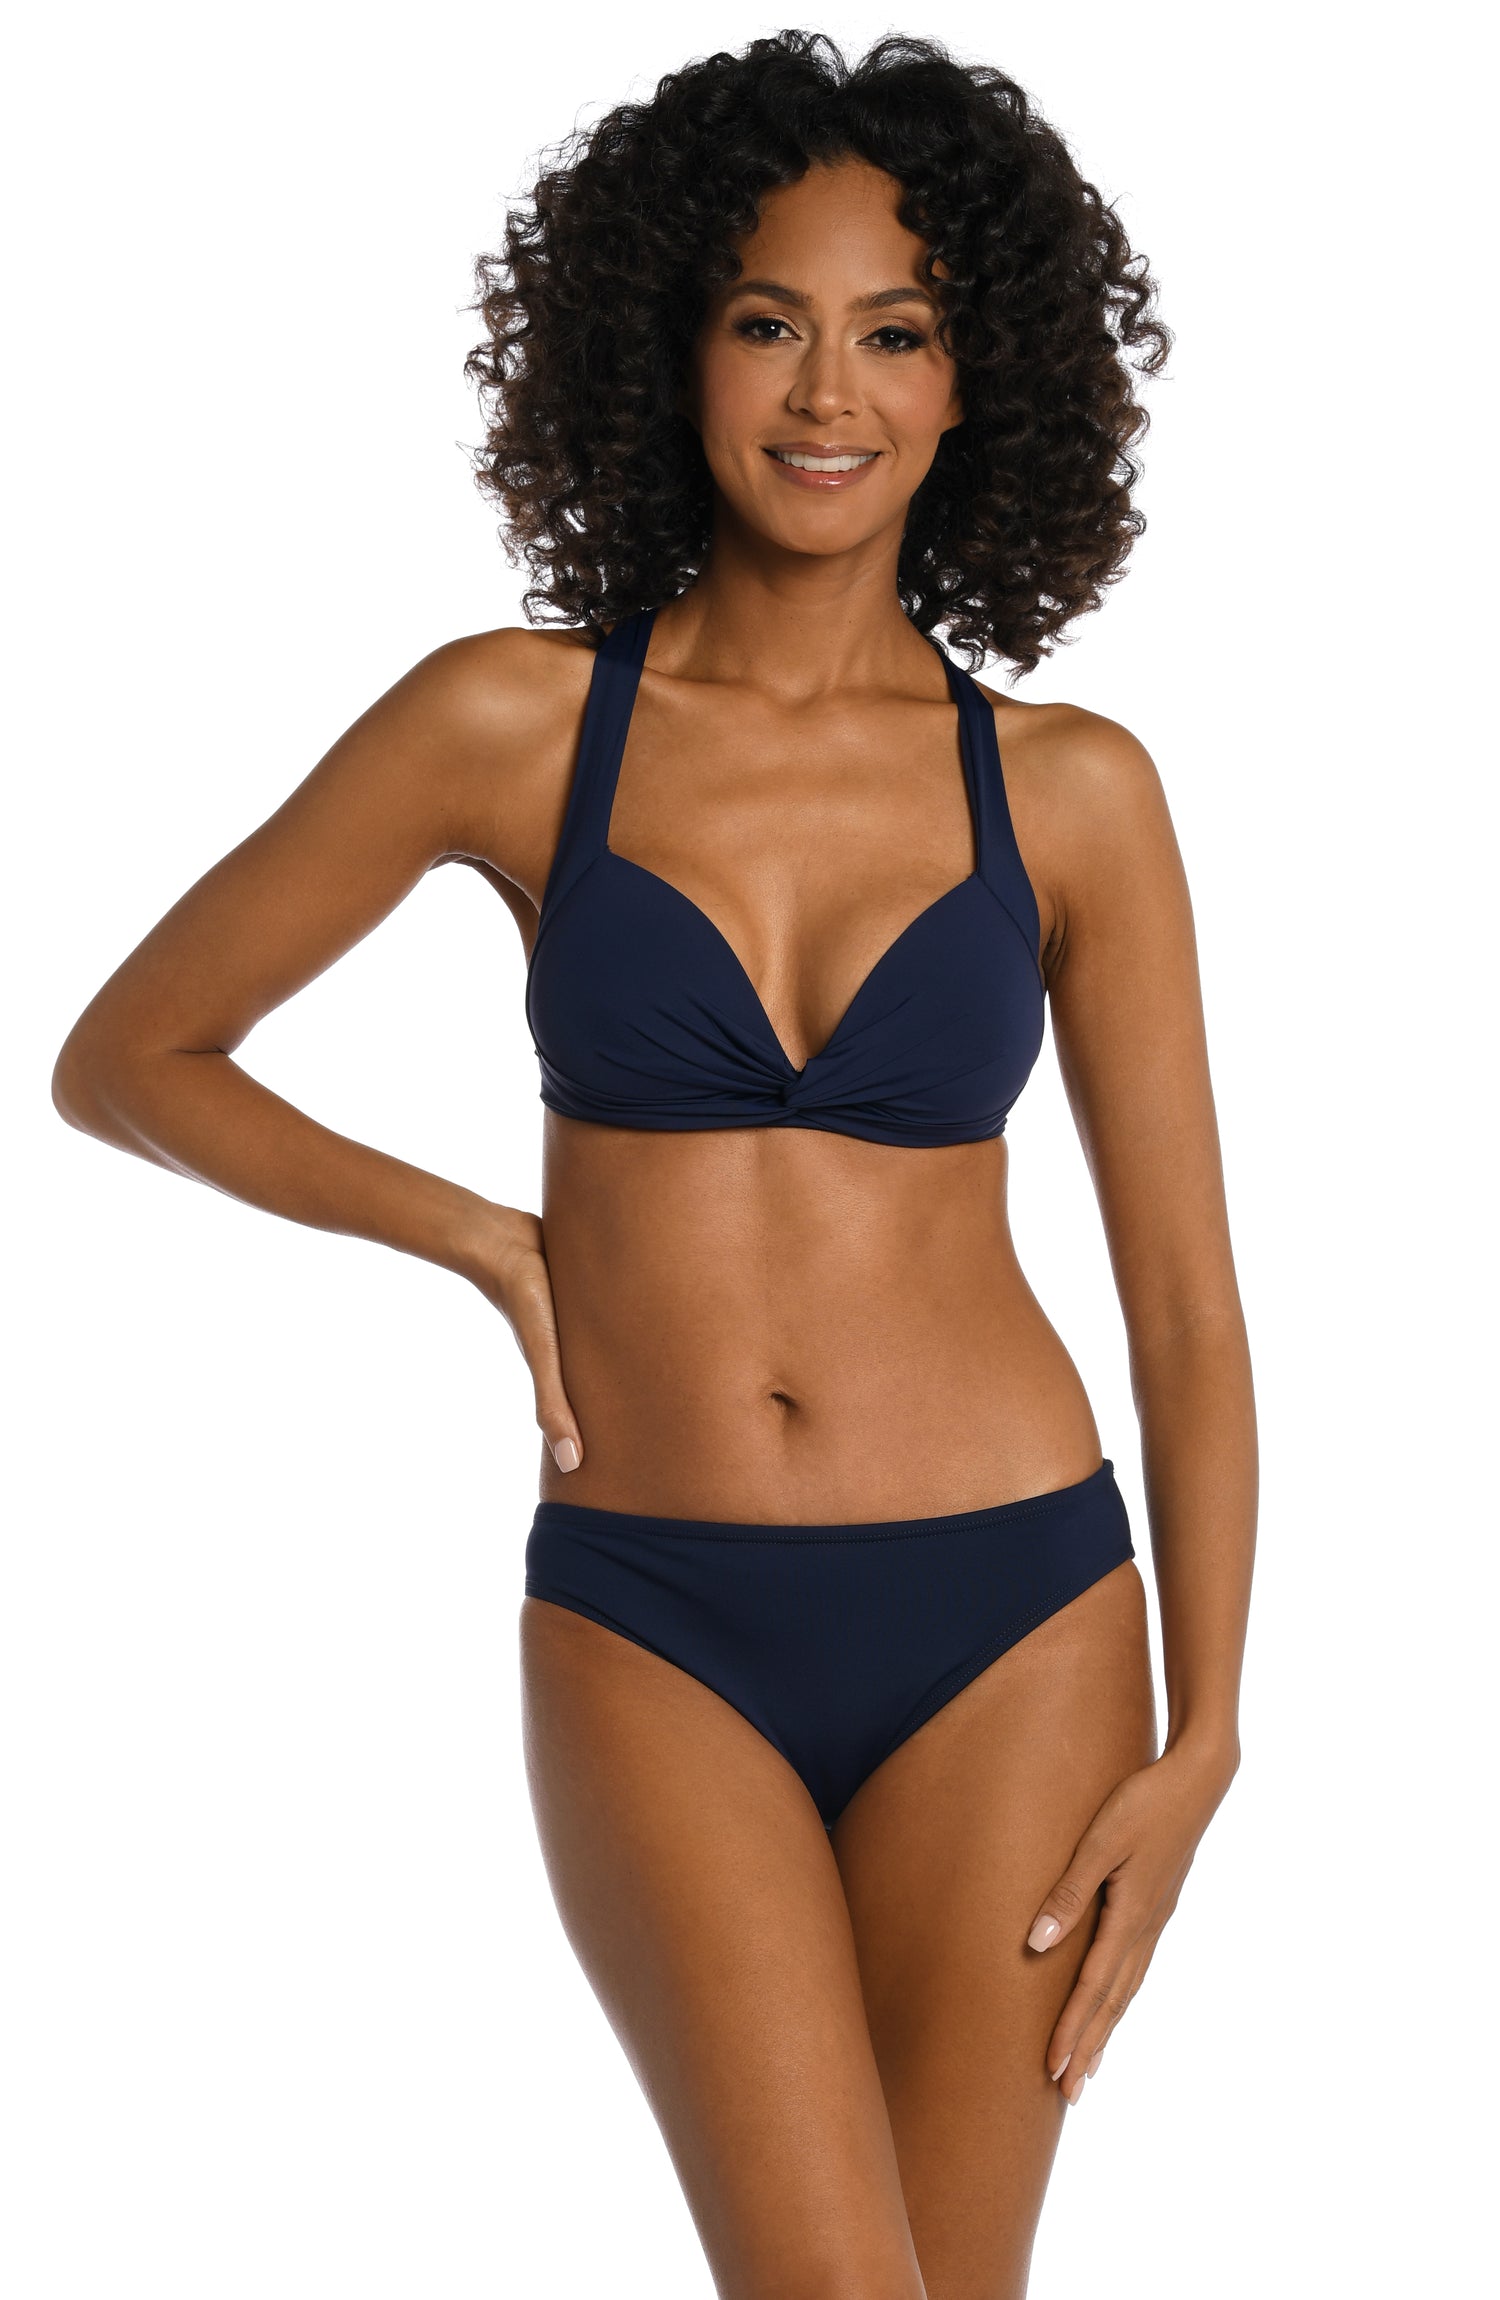 Model is wearing a indigo colored twist front swimsuit top from our Best-Selling Island Goddess collection.